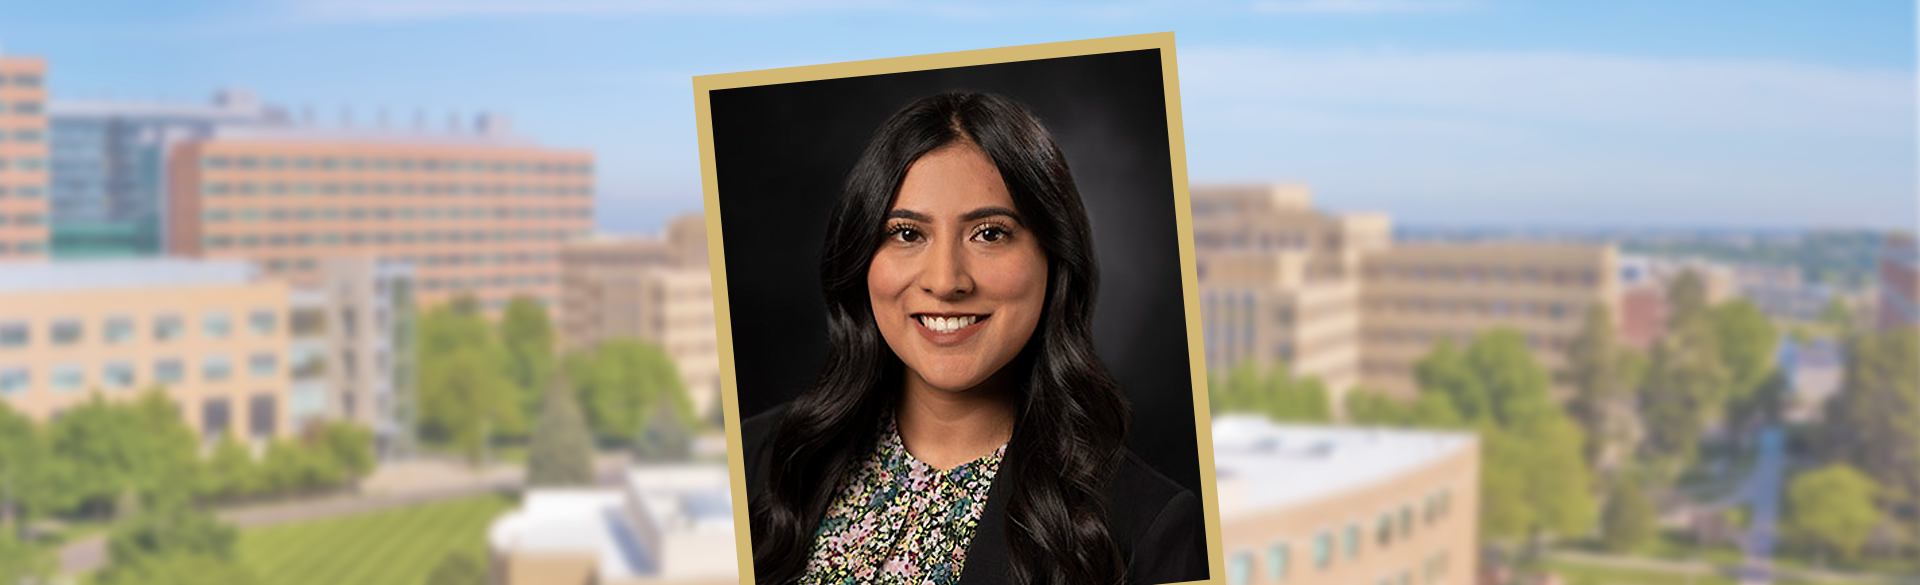 It was her family’s struggles that inspired University of Colorado medical student Bianca Sanchez to pursue a career in medicine.